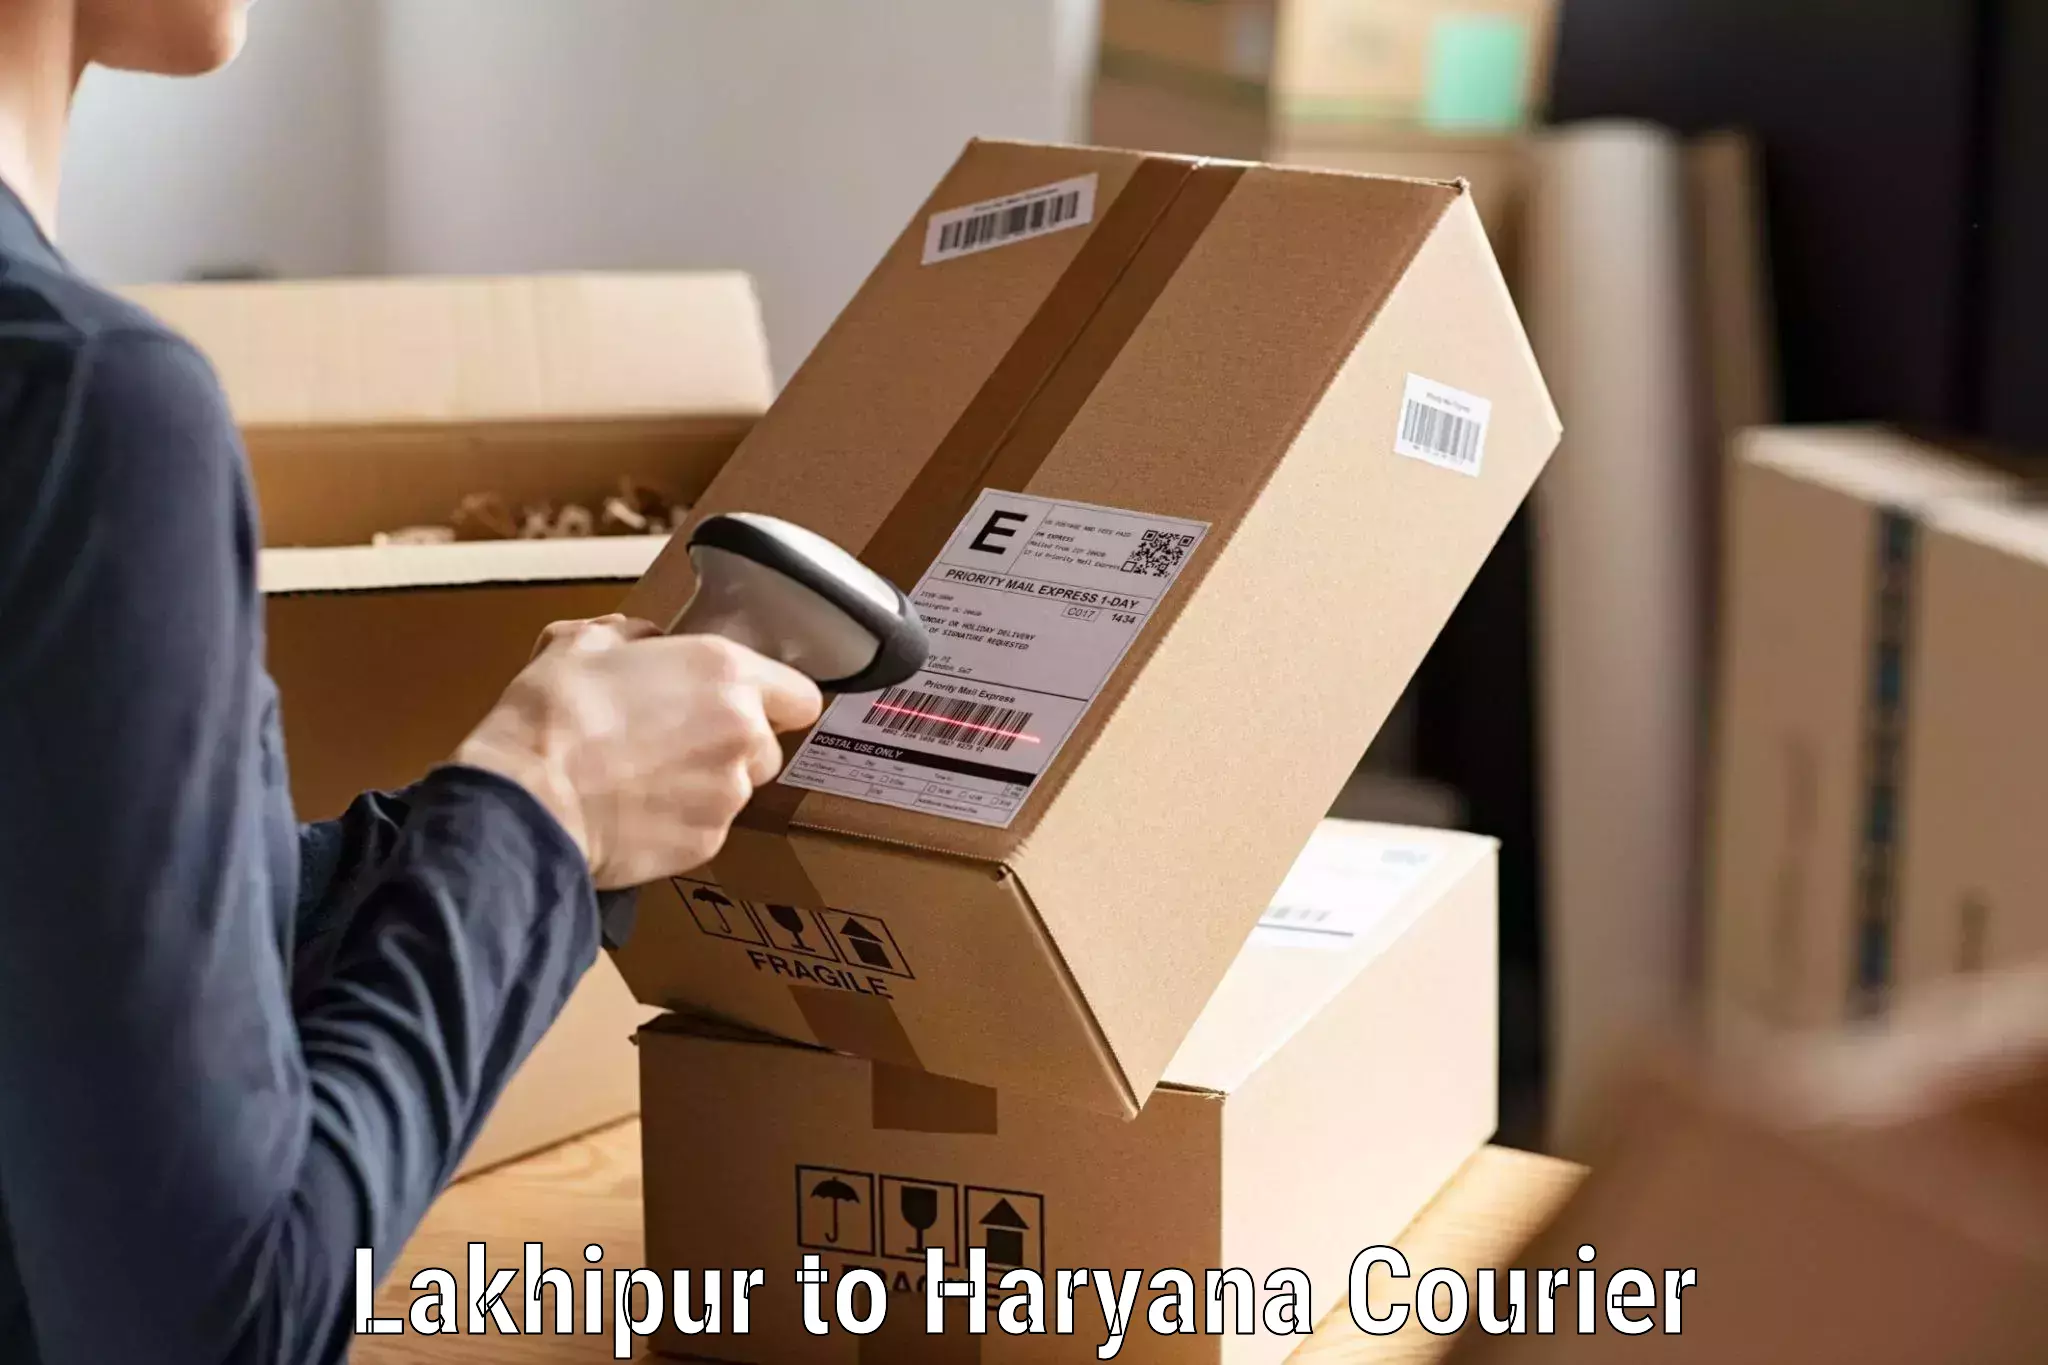 High-capacity parcel service Lakhipur to Assandh